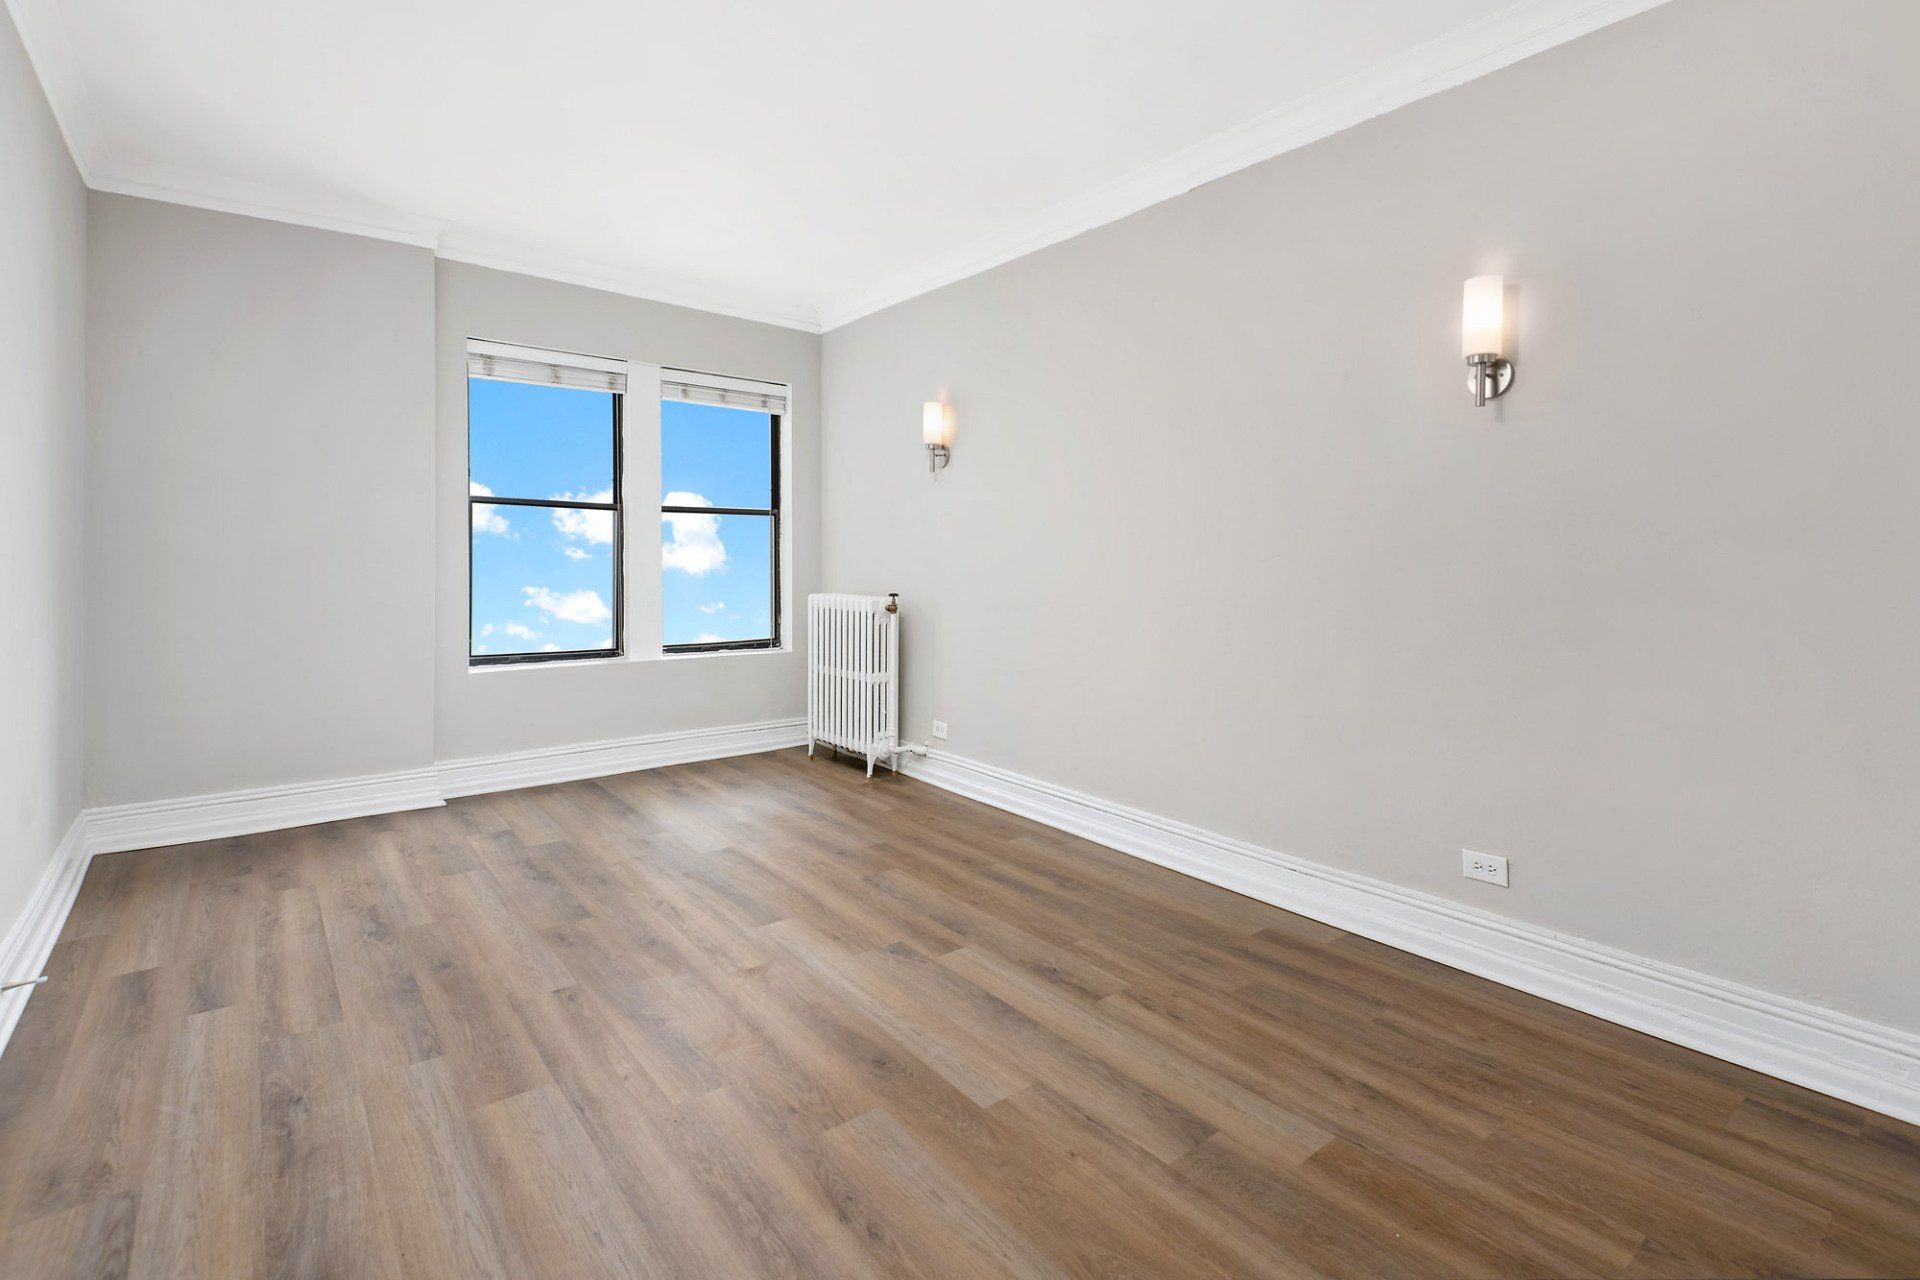 An empty room with hardwood floors and two windows at Reside on Clarendon.